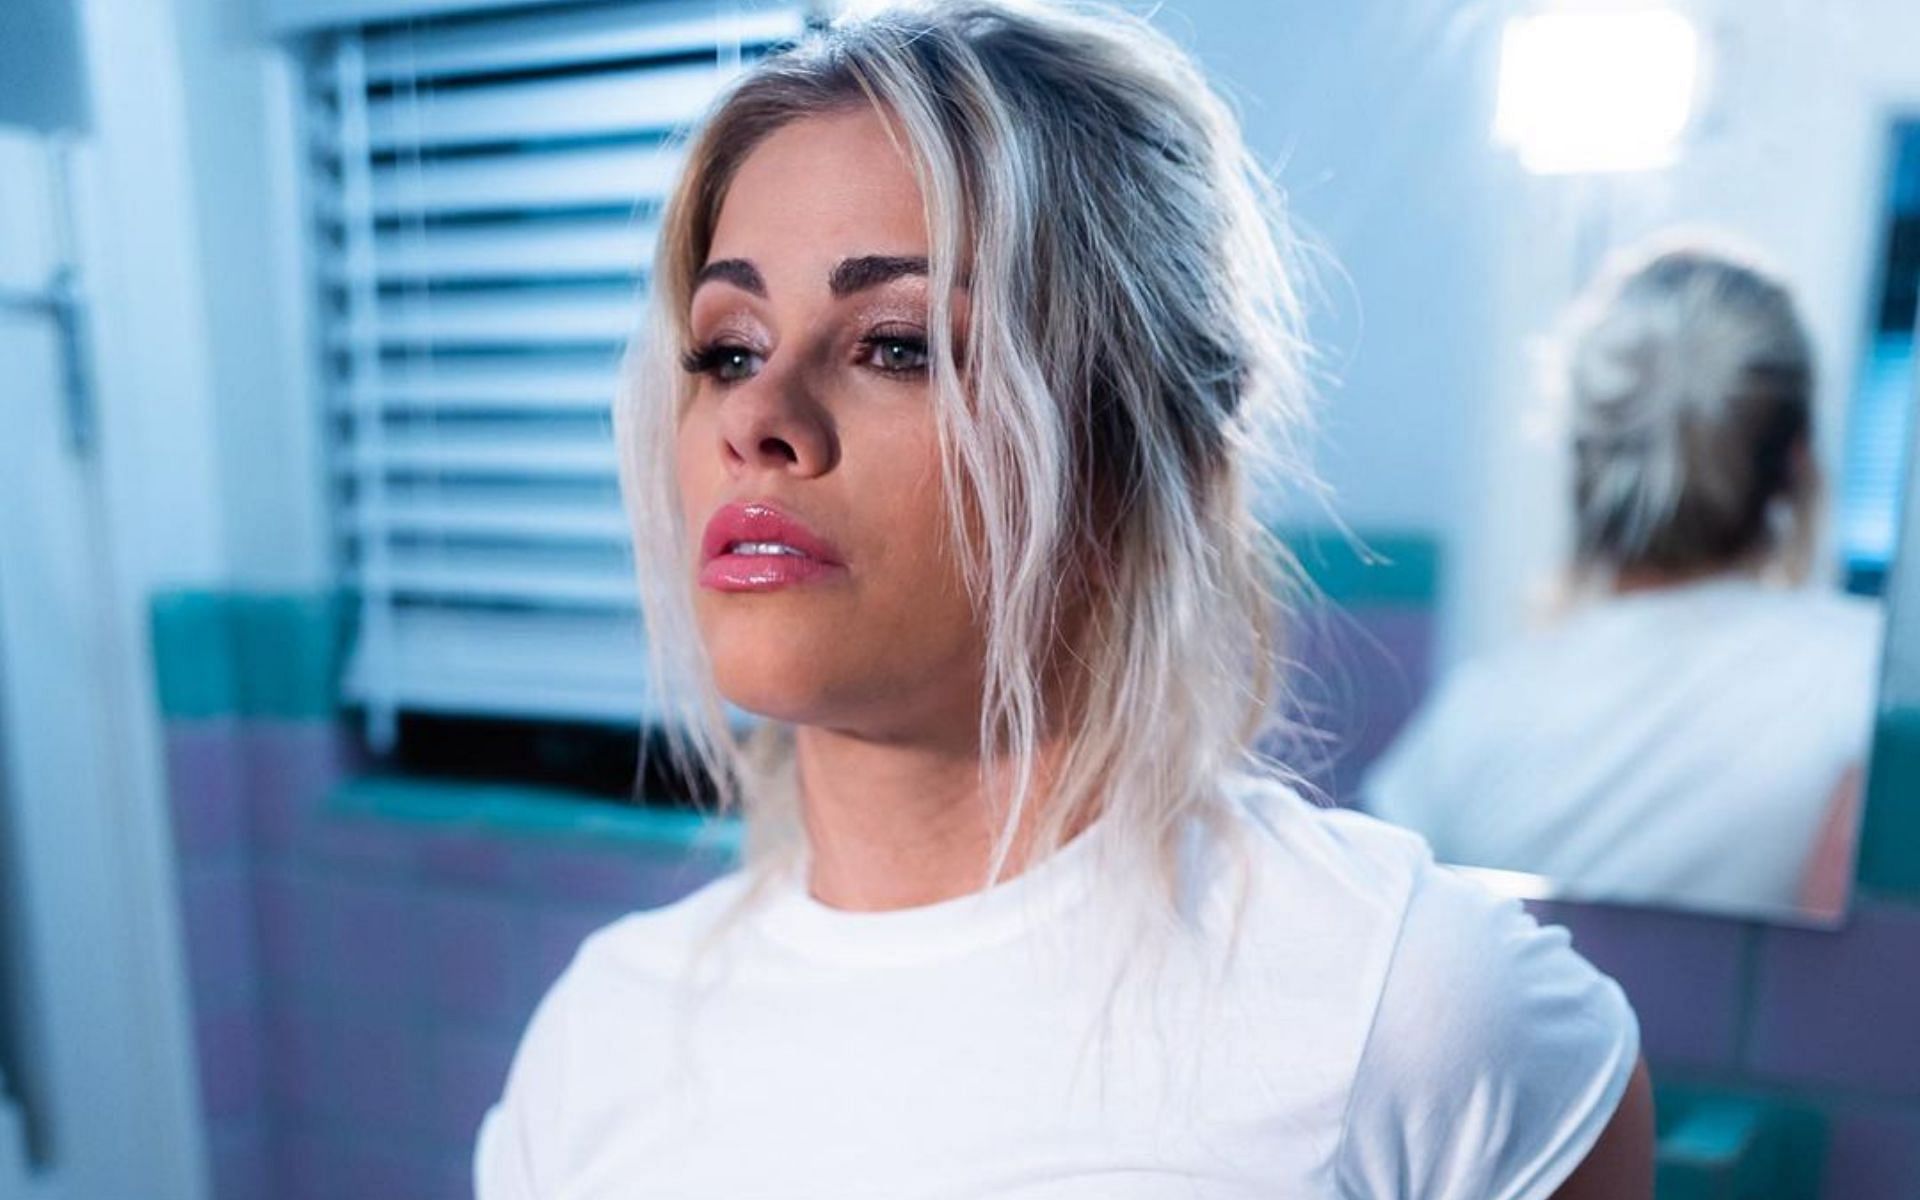 Paige VanZant discusses about the struggles in her weight loss journey